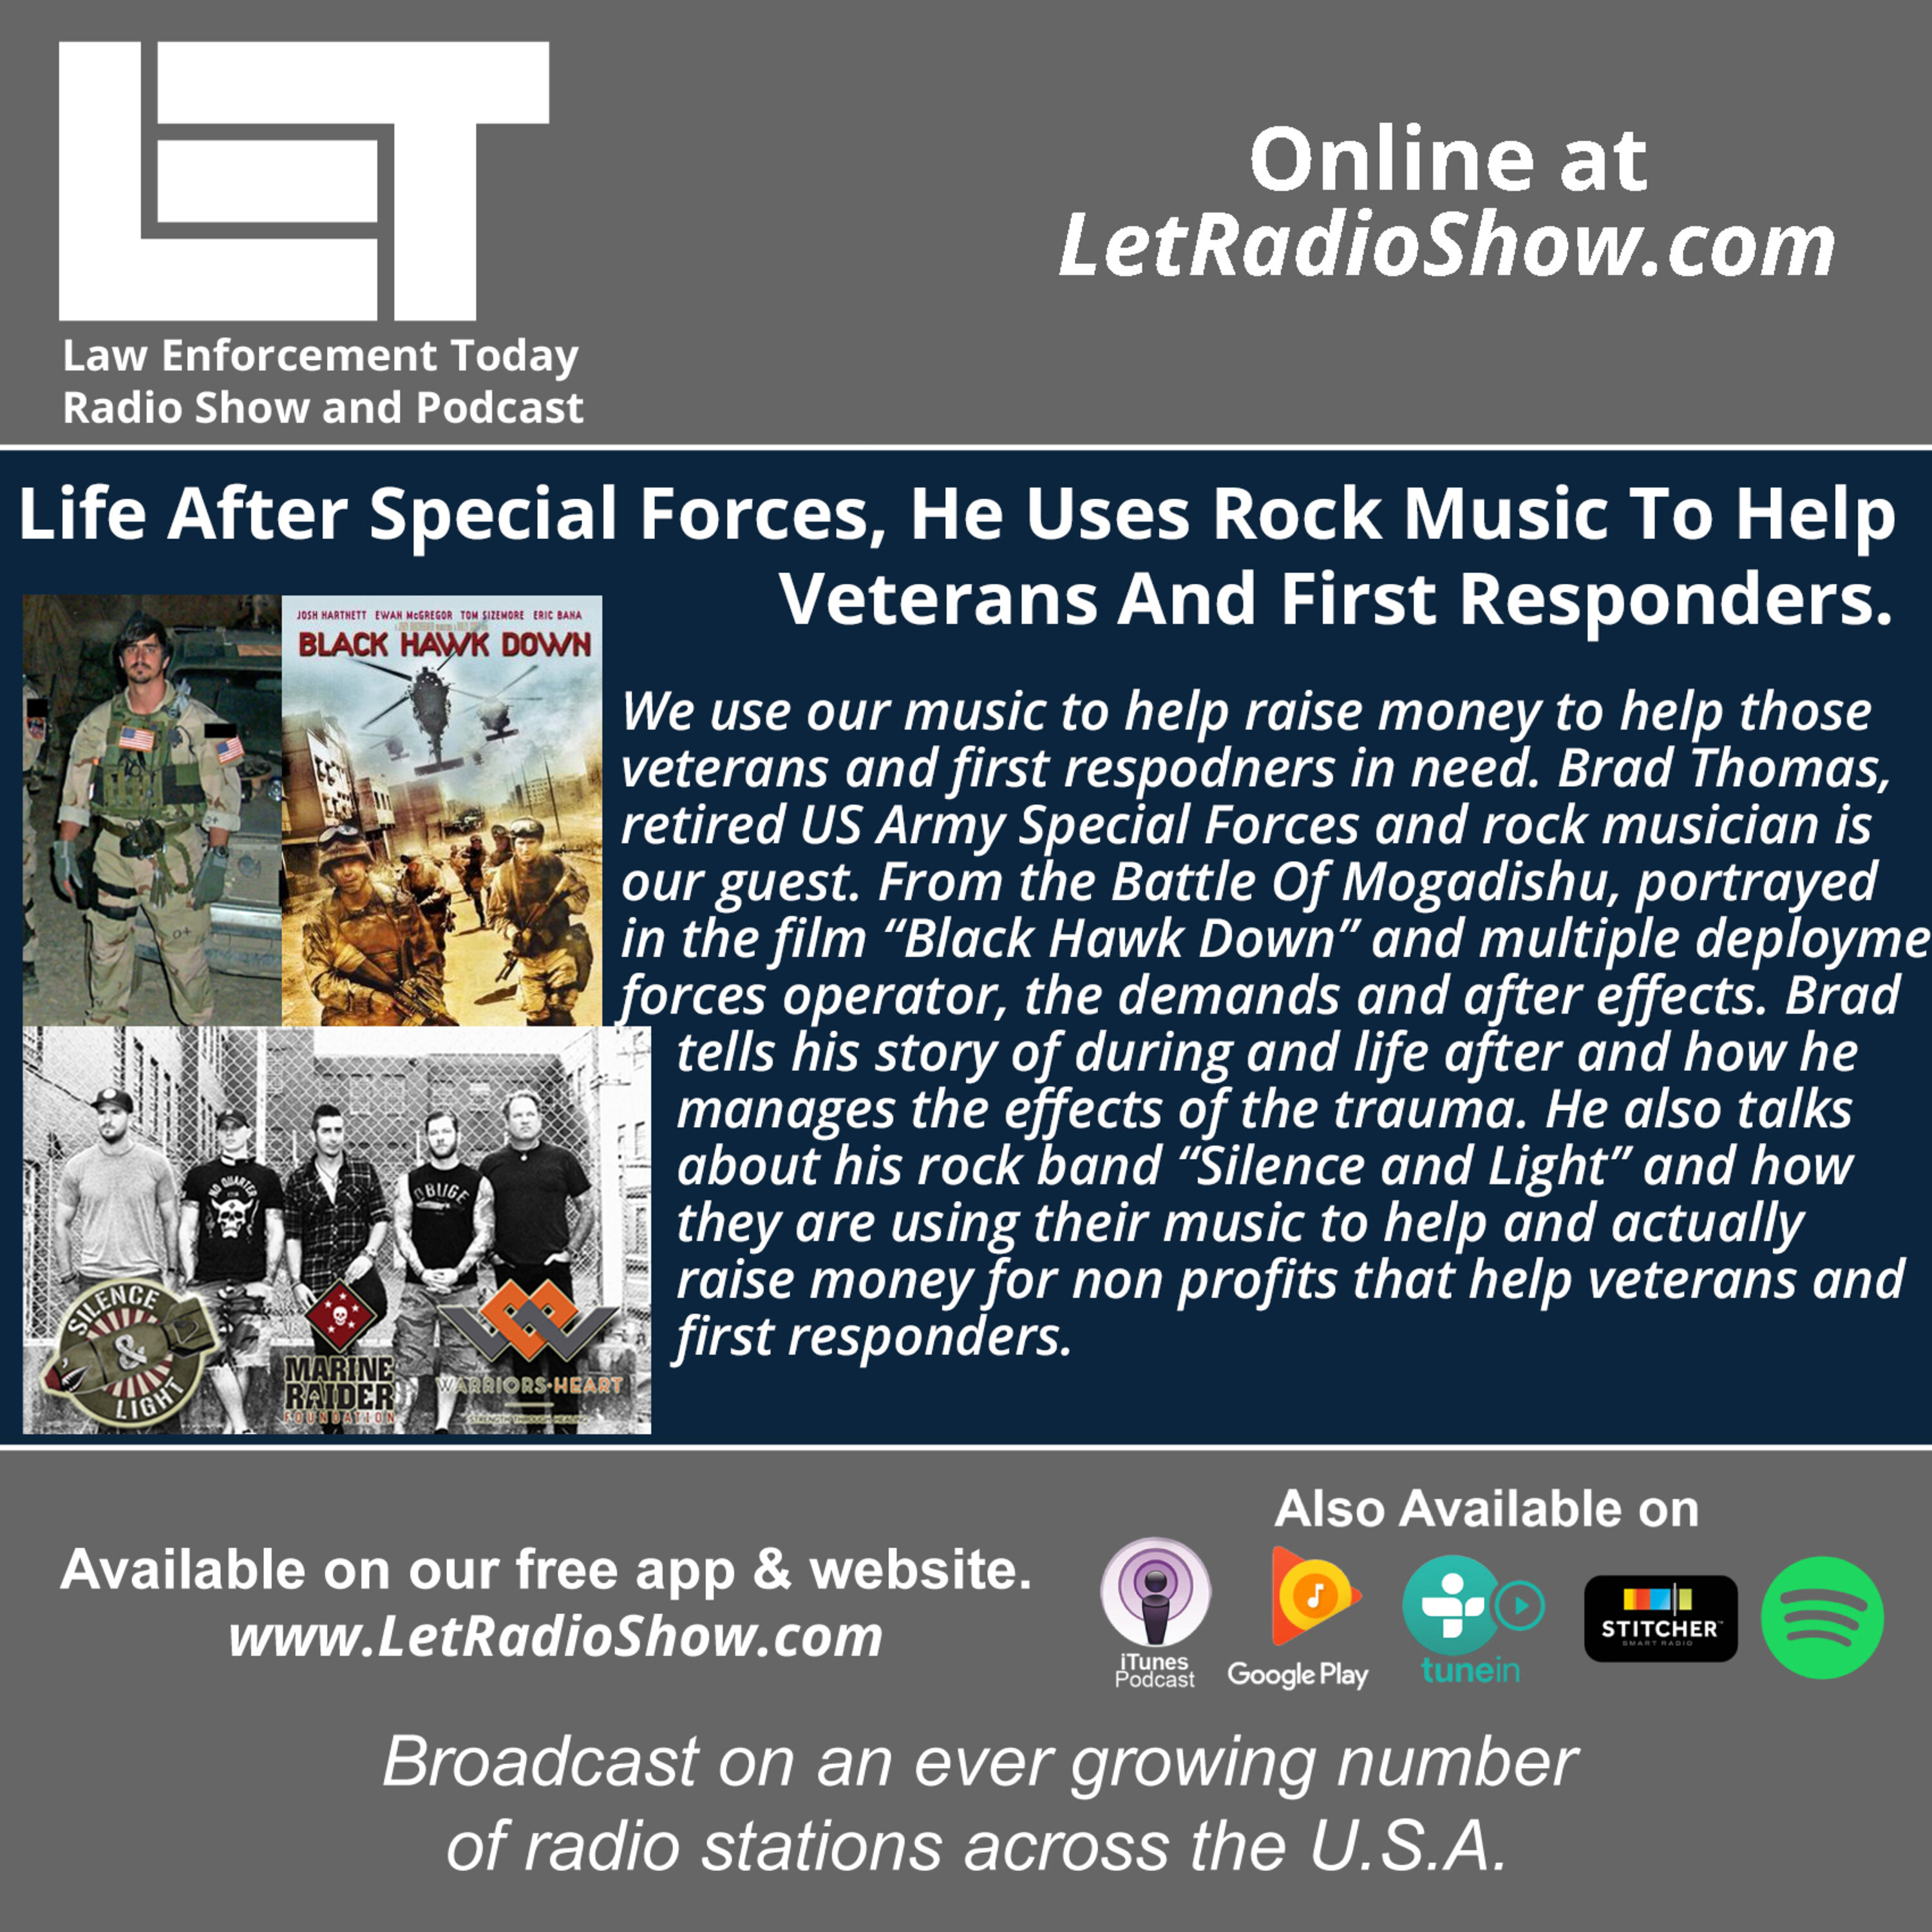 S5E28: Life After Special Forces, He Uses Rock Music To Help Veterans And First Responders.